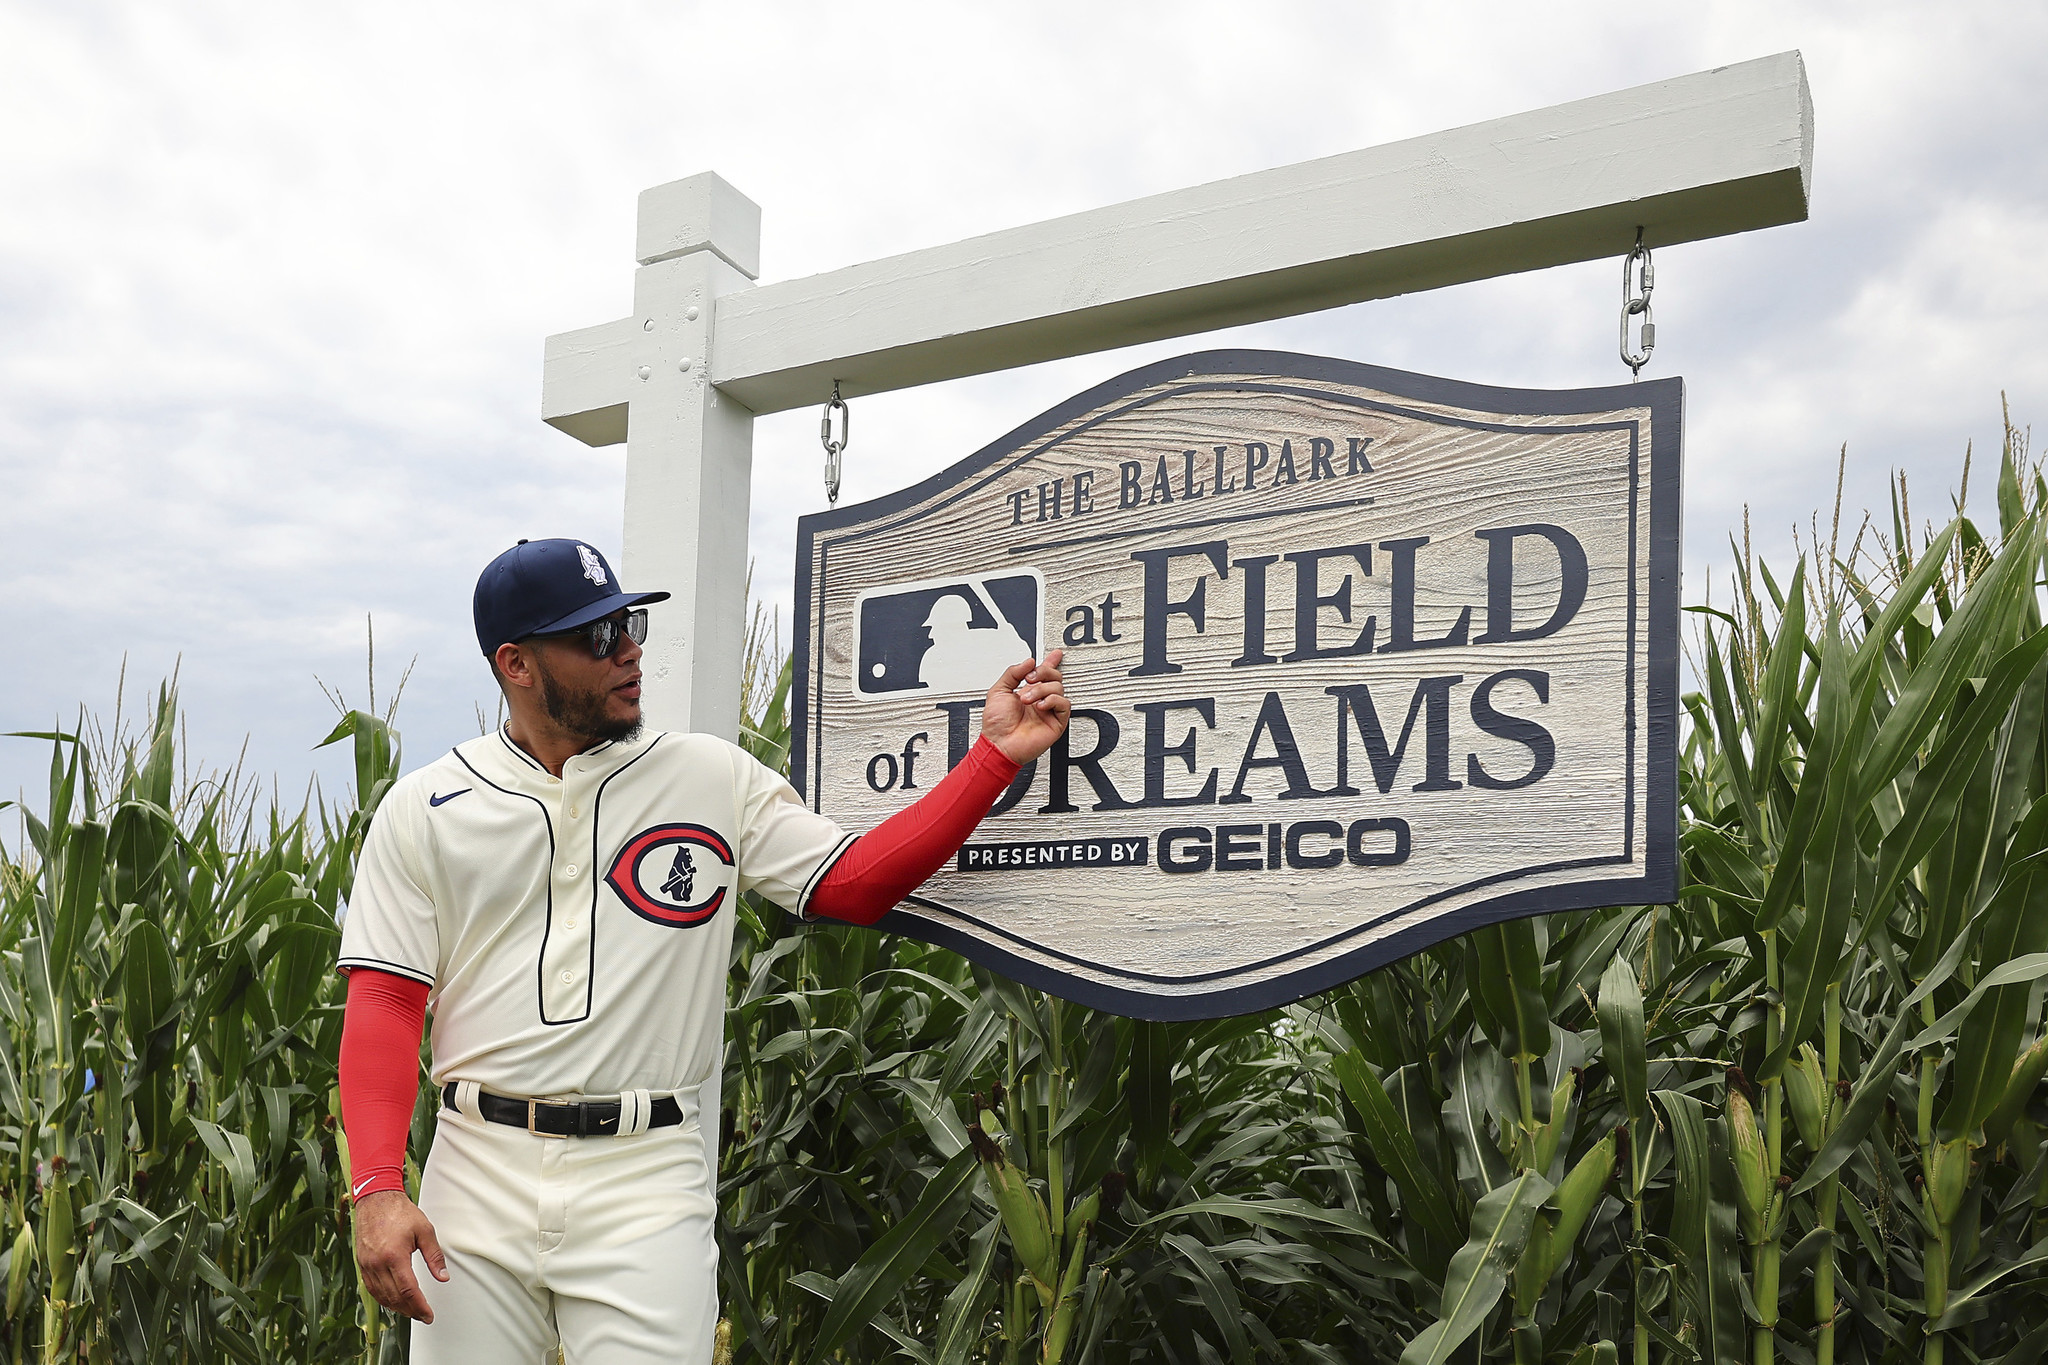 Photos from the Field of Dreams 2022 Cubs vs. Reds game